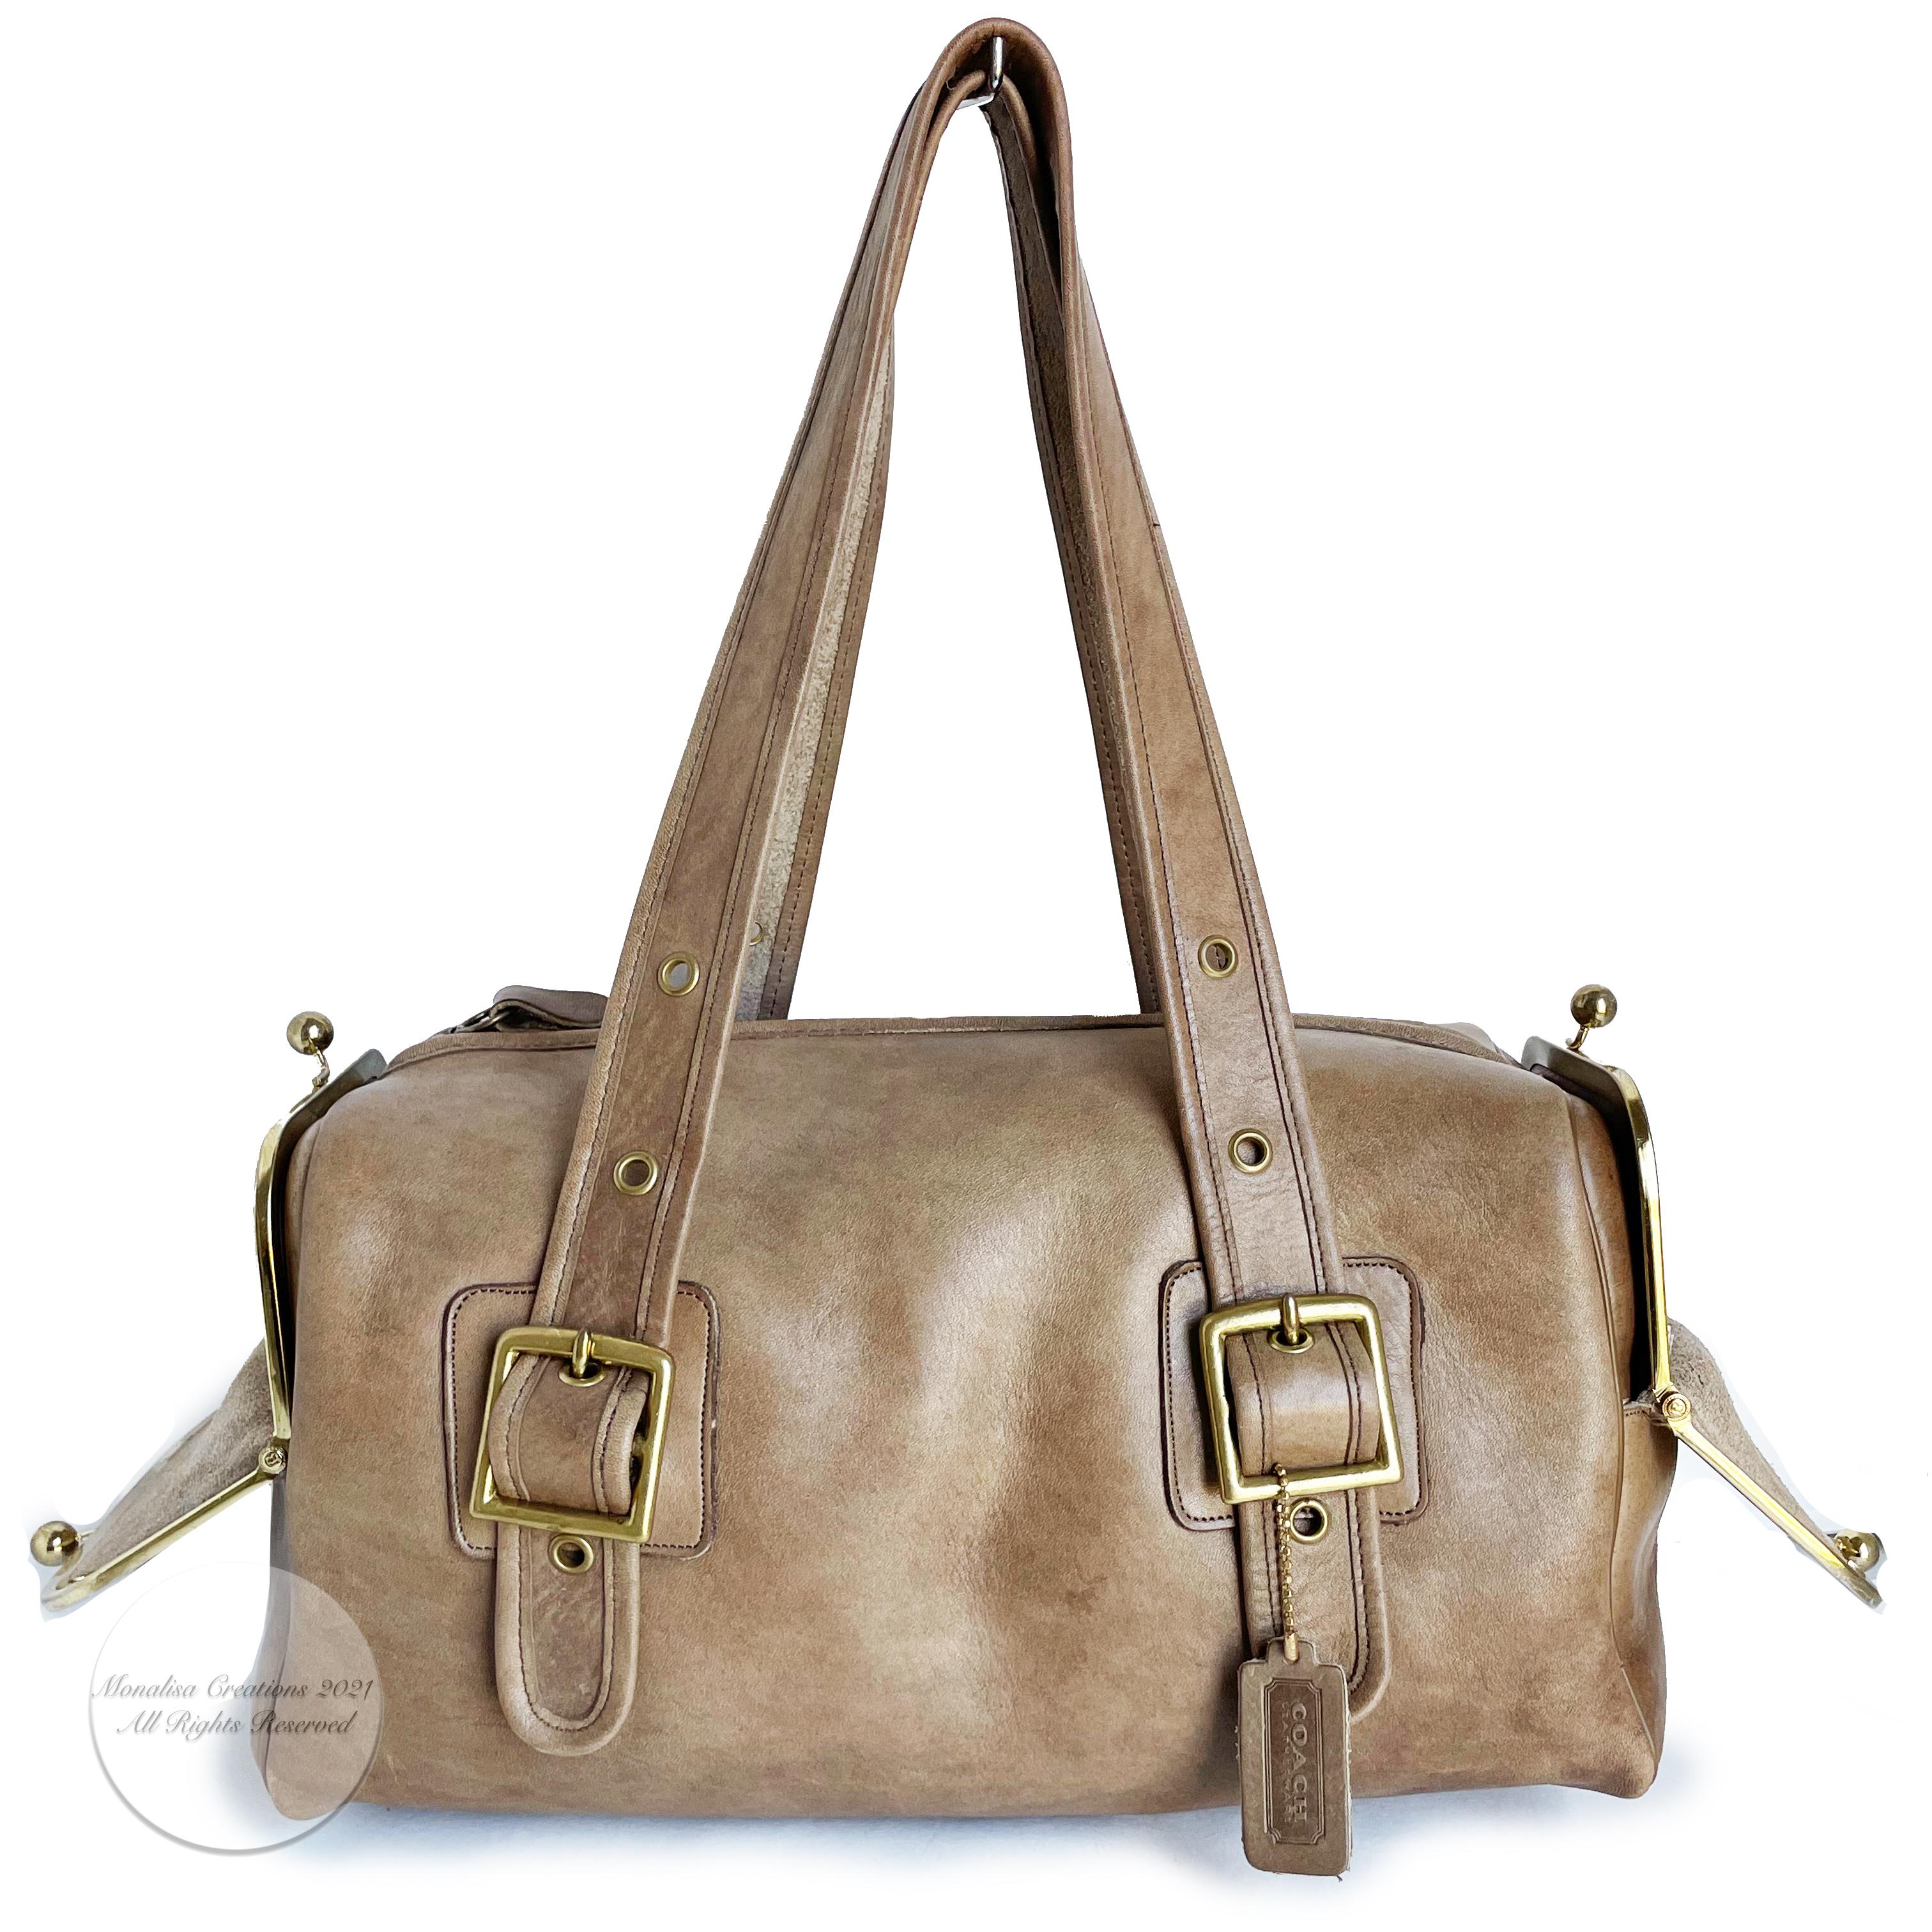 Authentic, preowned, vintage 70s Bonnie Cashin Coach RFD Mailbox bag or tote. A unicorn! Coach re-released a newer version of this bag several years back: this is the original. Pre-creed metal tag. Putty leather/unlined/kiss lock pockets at sides.